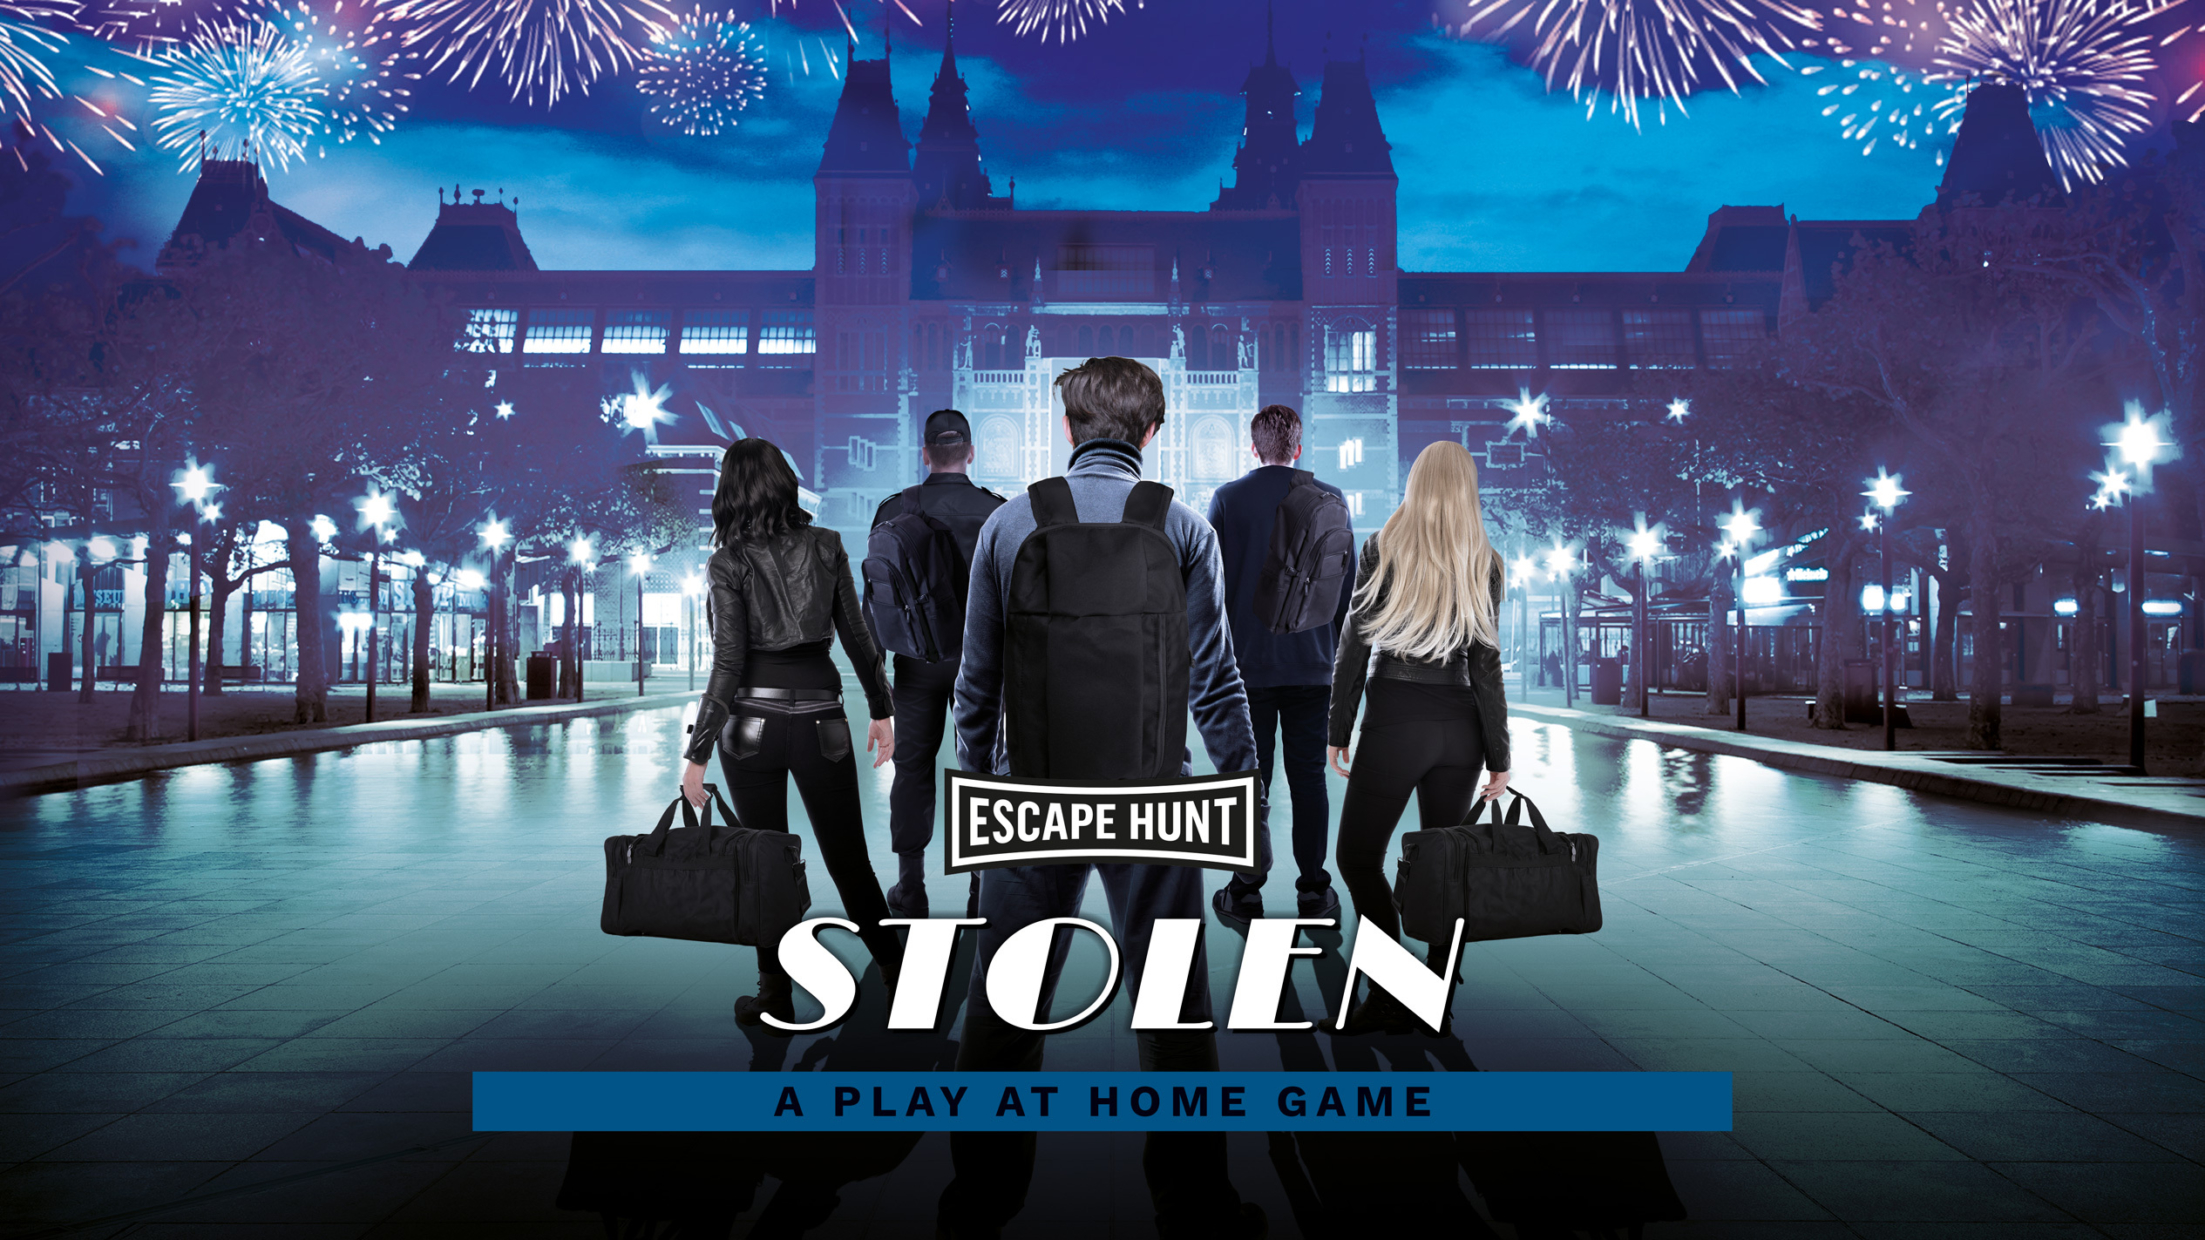 STOLEN – NEW PLAY AT HOME ESCAPE ROOM GAME!